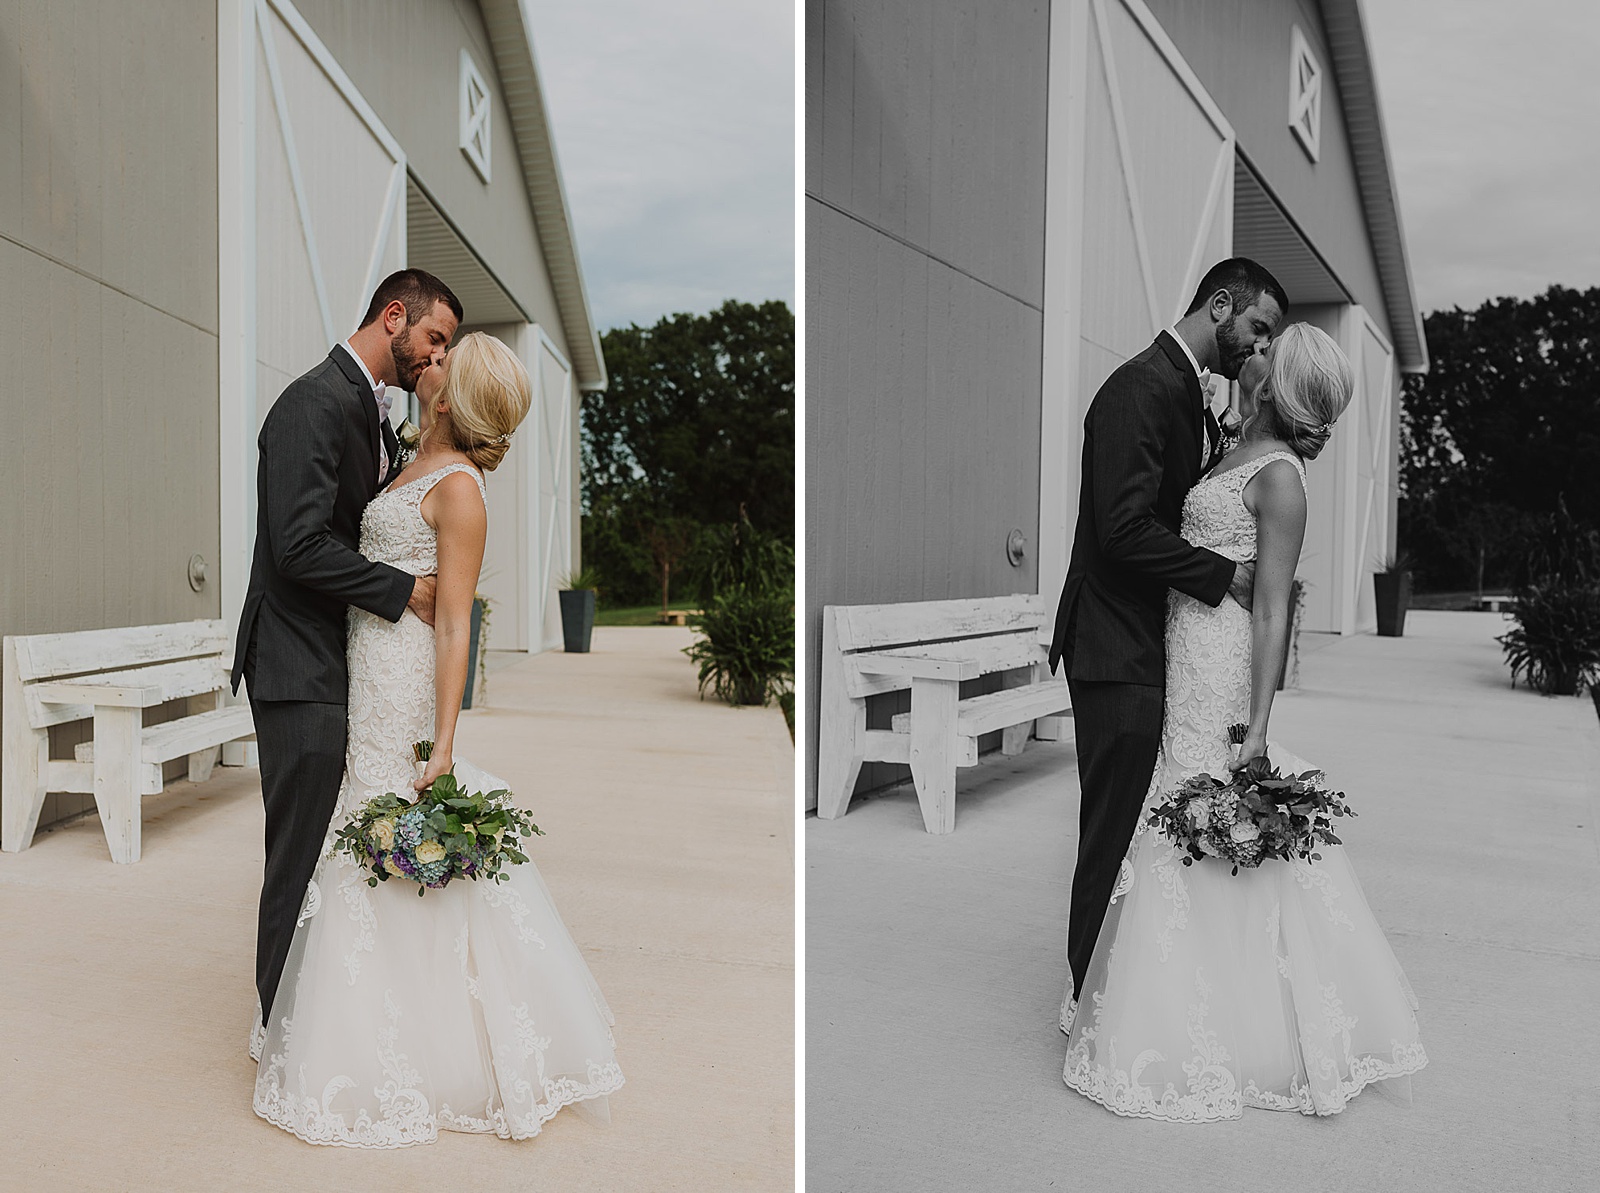 Kansas City wedding at The Farms at Woodend Springs captured by Caitlyn Cloud Photography